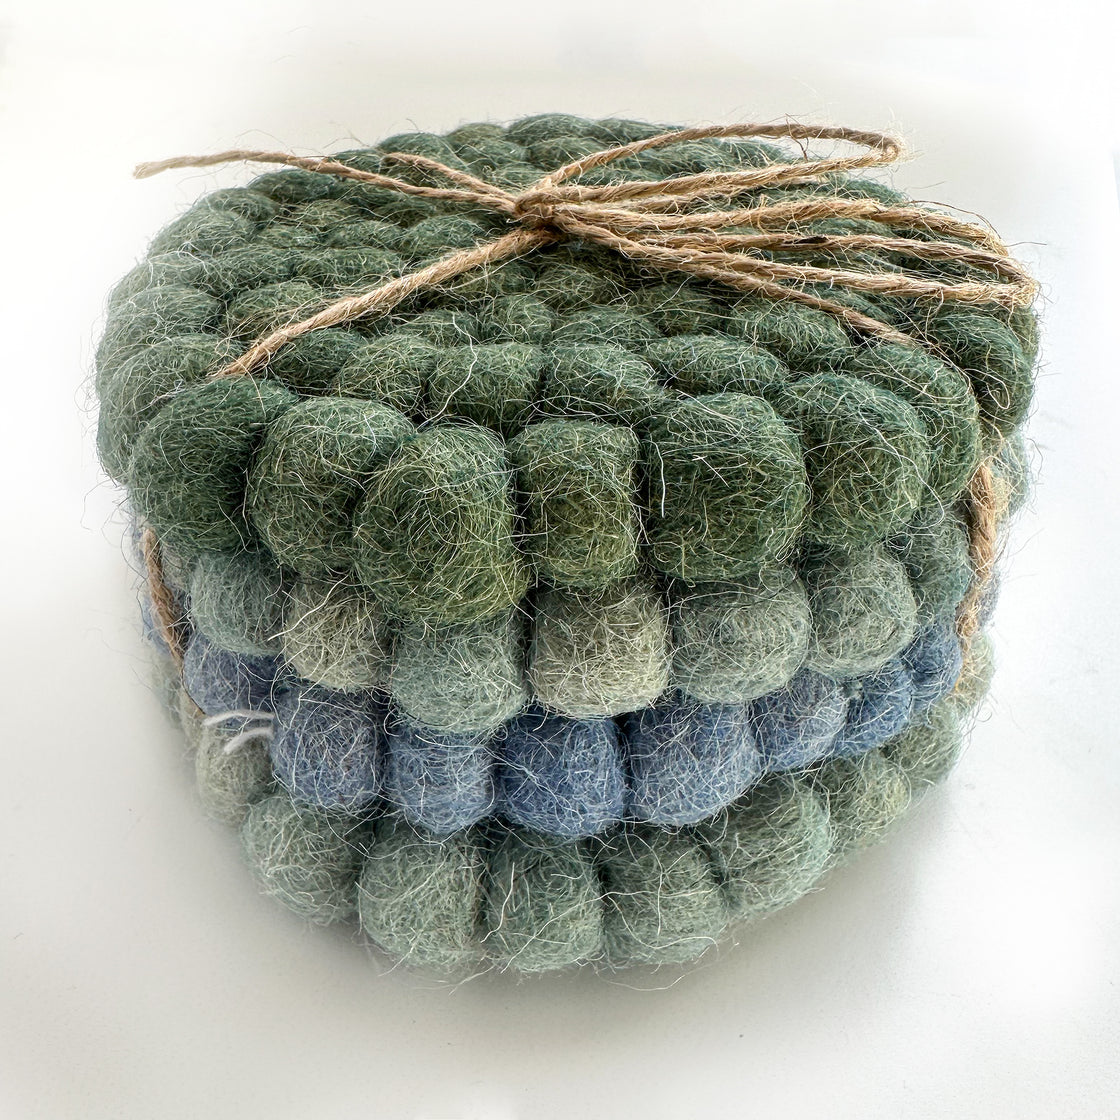 a set of four rengora coasters bundled together using a twine string by rengöra